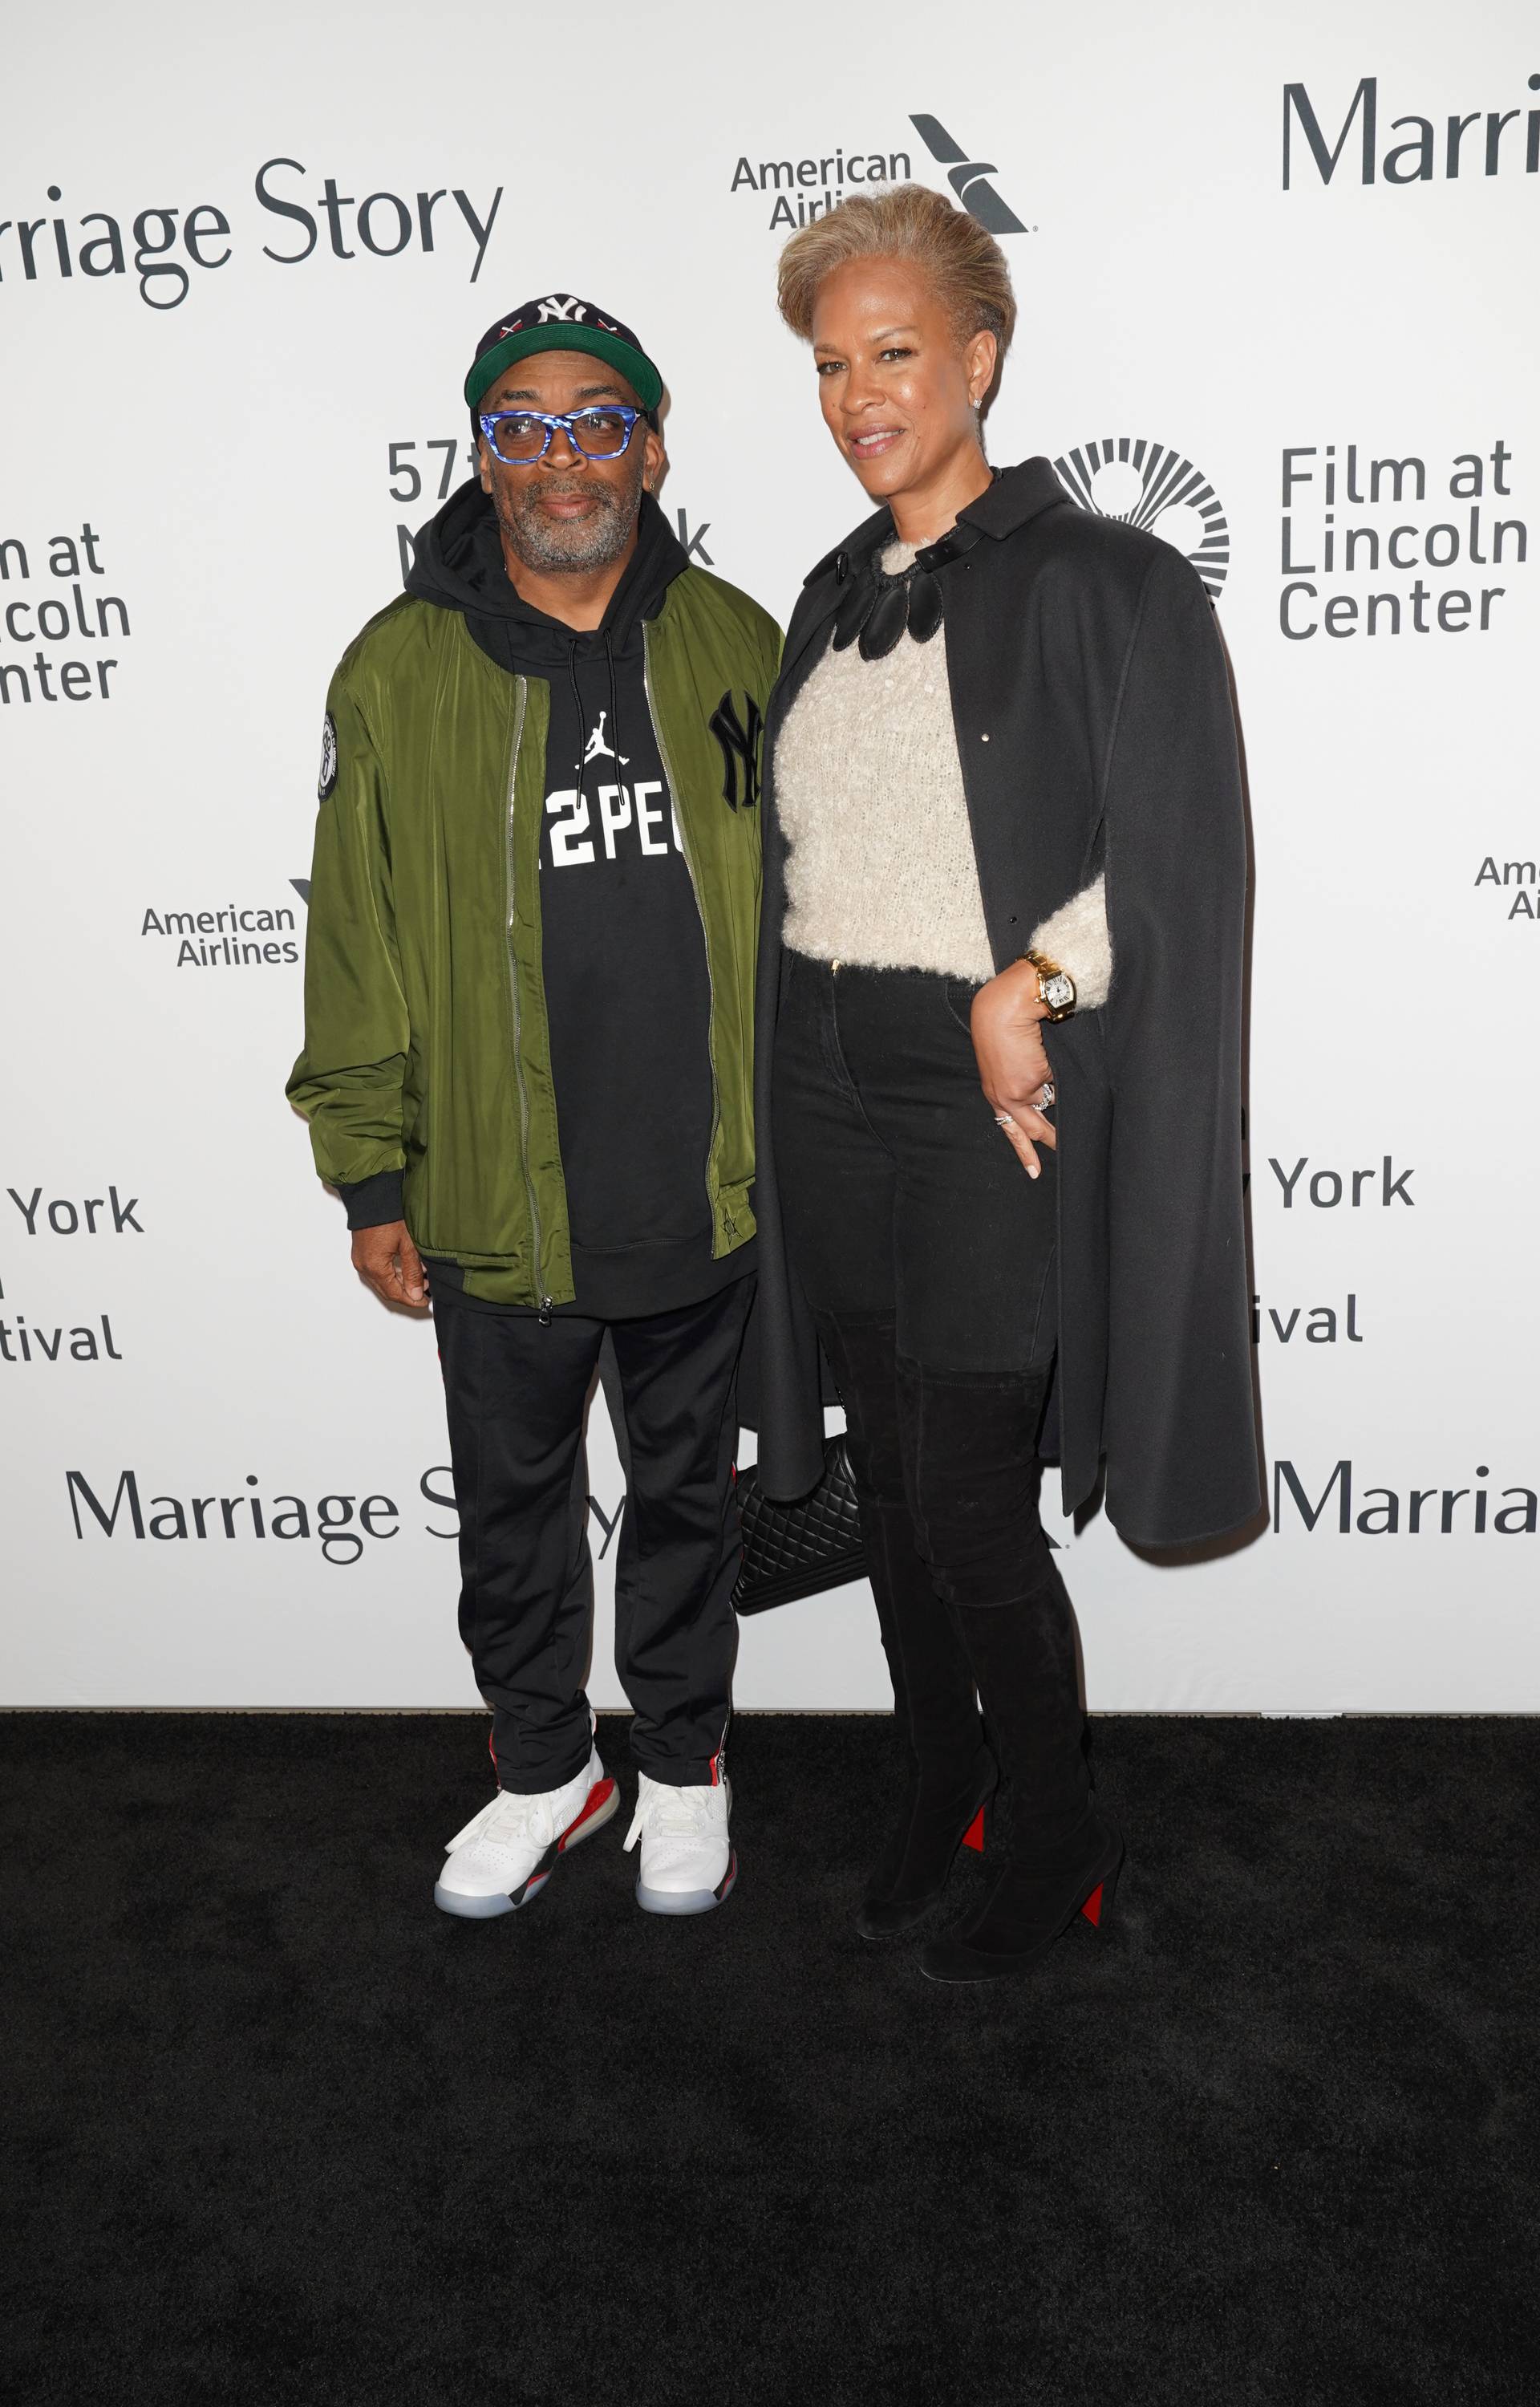 Marriage Story Premiere - New York